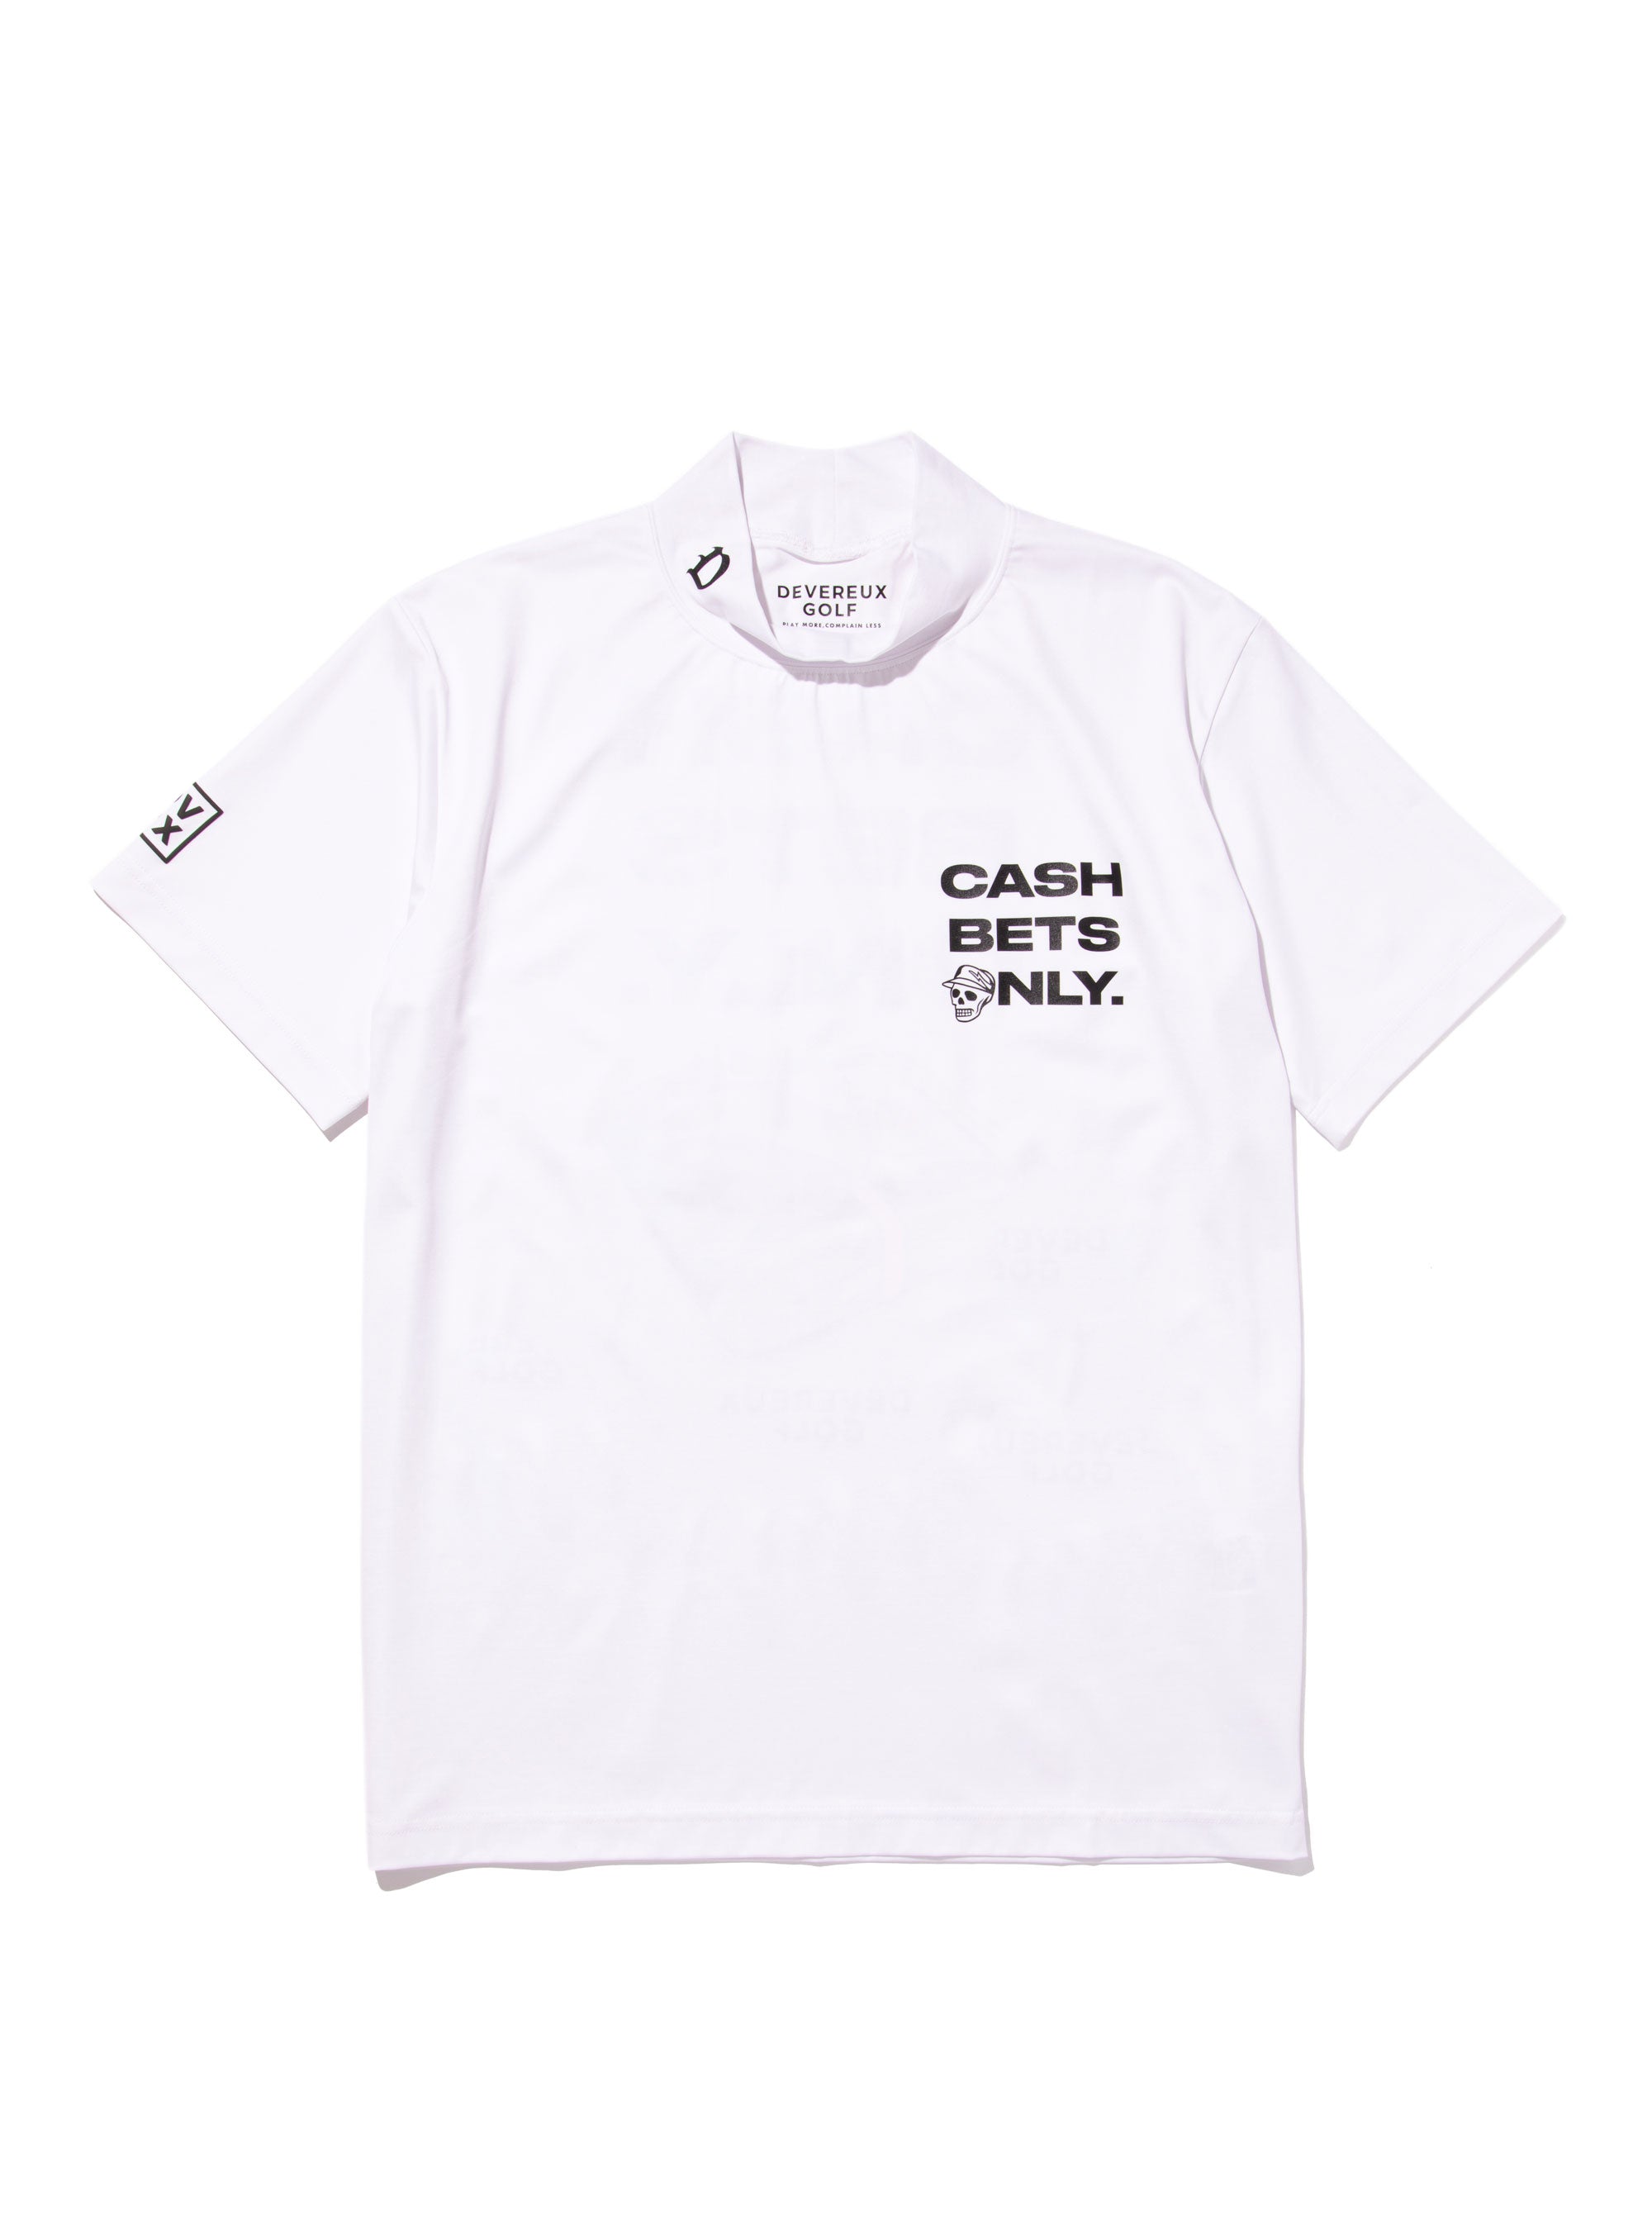 Cash Bets Only 2 Mock Neck Tee 763572001-WHITE